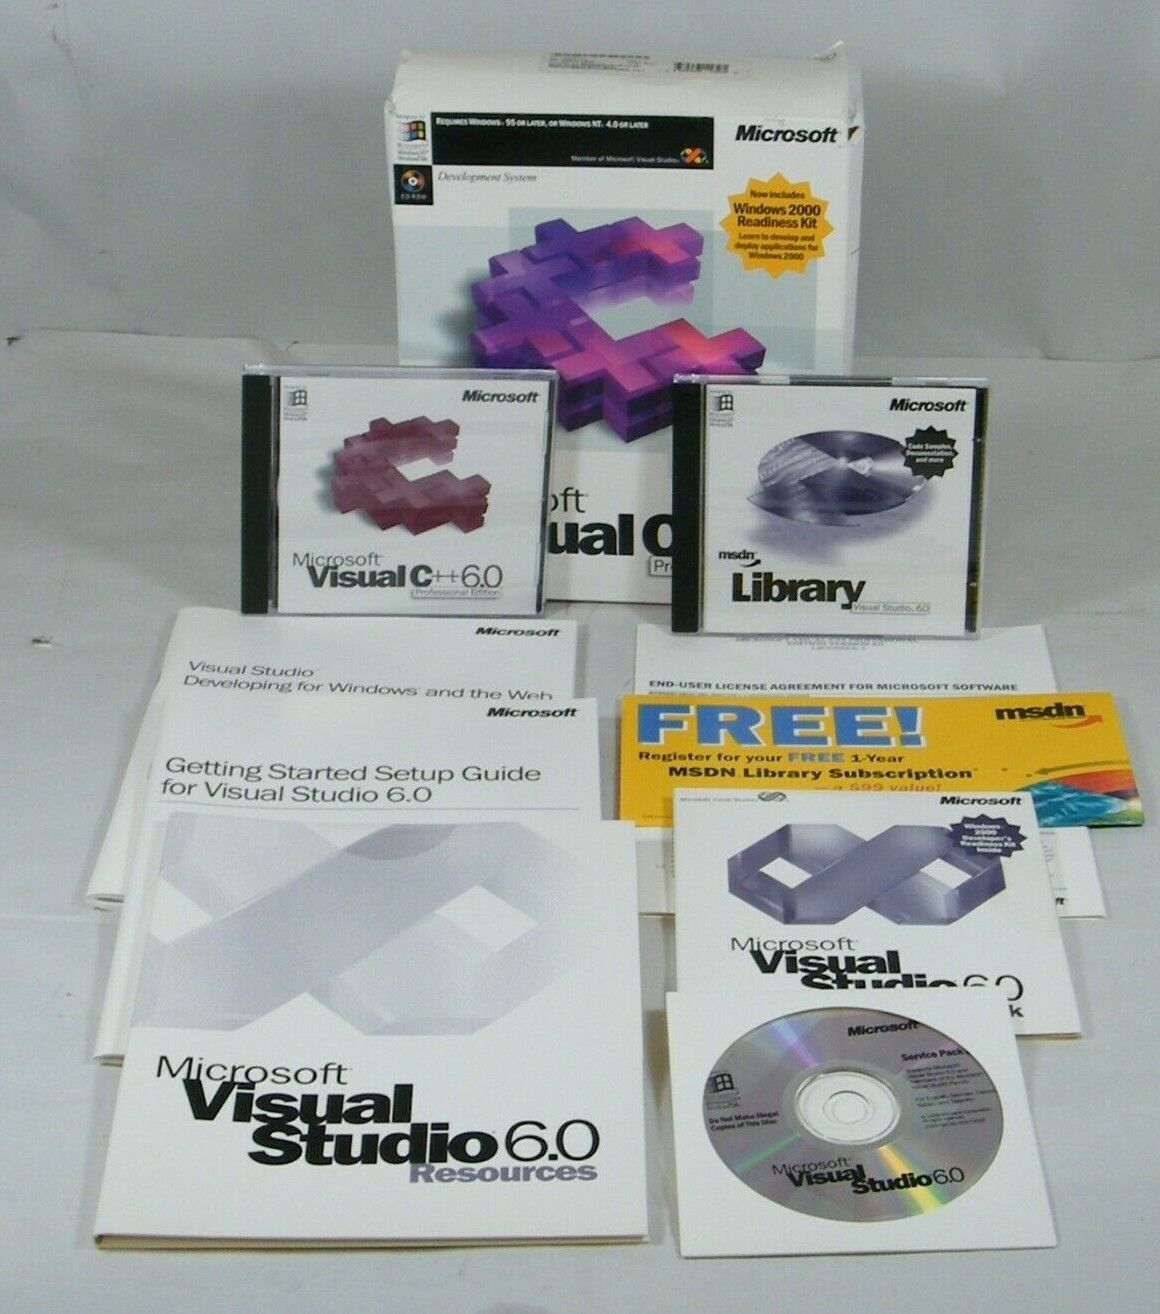 MICROSOFT VISUAL C++6.0 PROFESSIONAL EDITION WINDOW 95 OR LATER SEALED